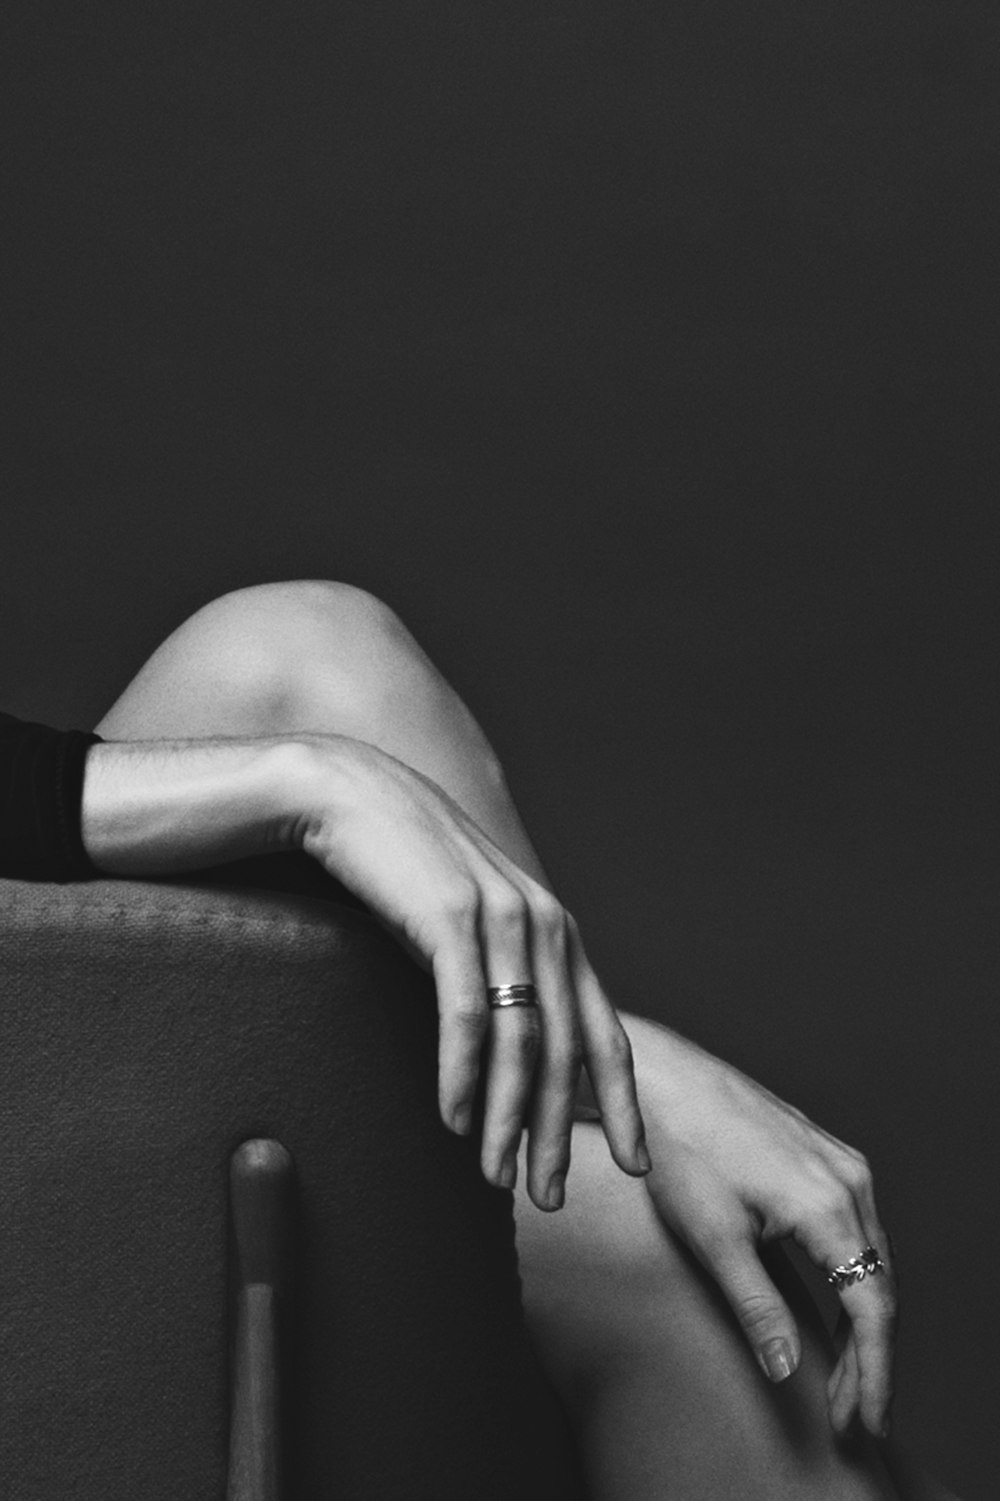 grayscale photography of sitting person wearing rings with both hands